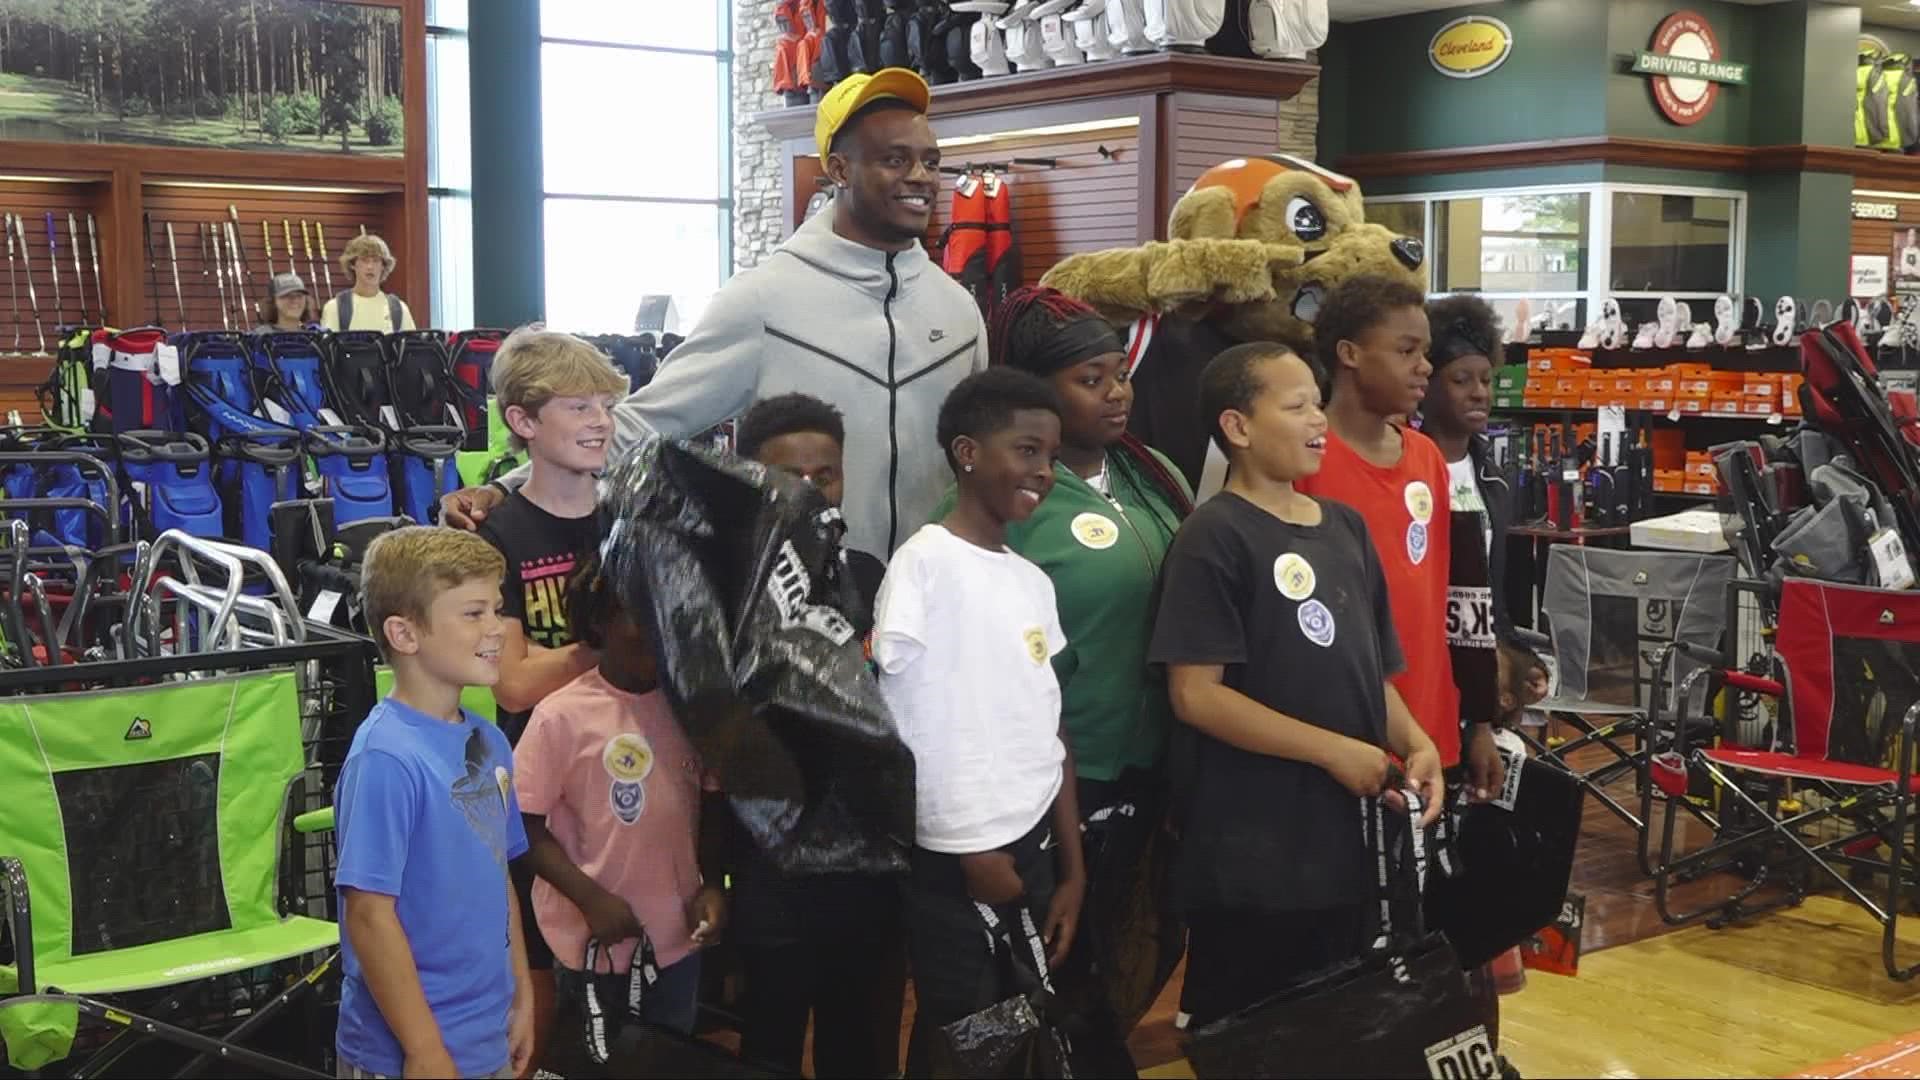 The kids were all given $150 gift cards to Dicks Sporting Goods